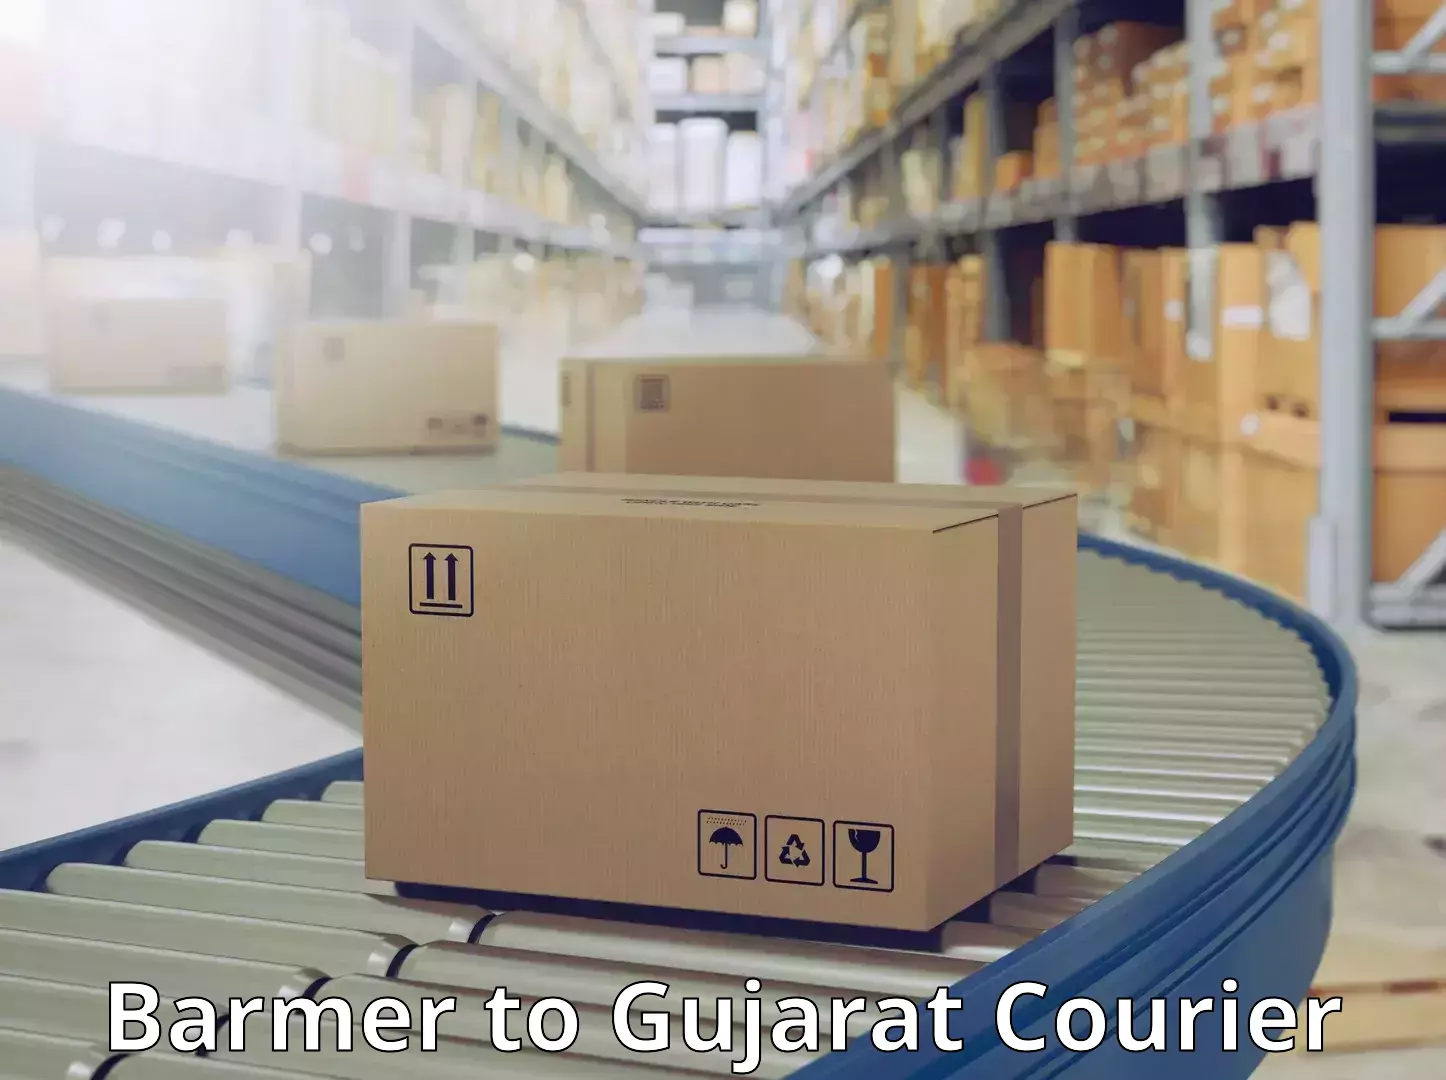 Subscription-based courier Barmer to Vatadara